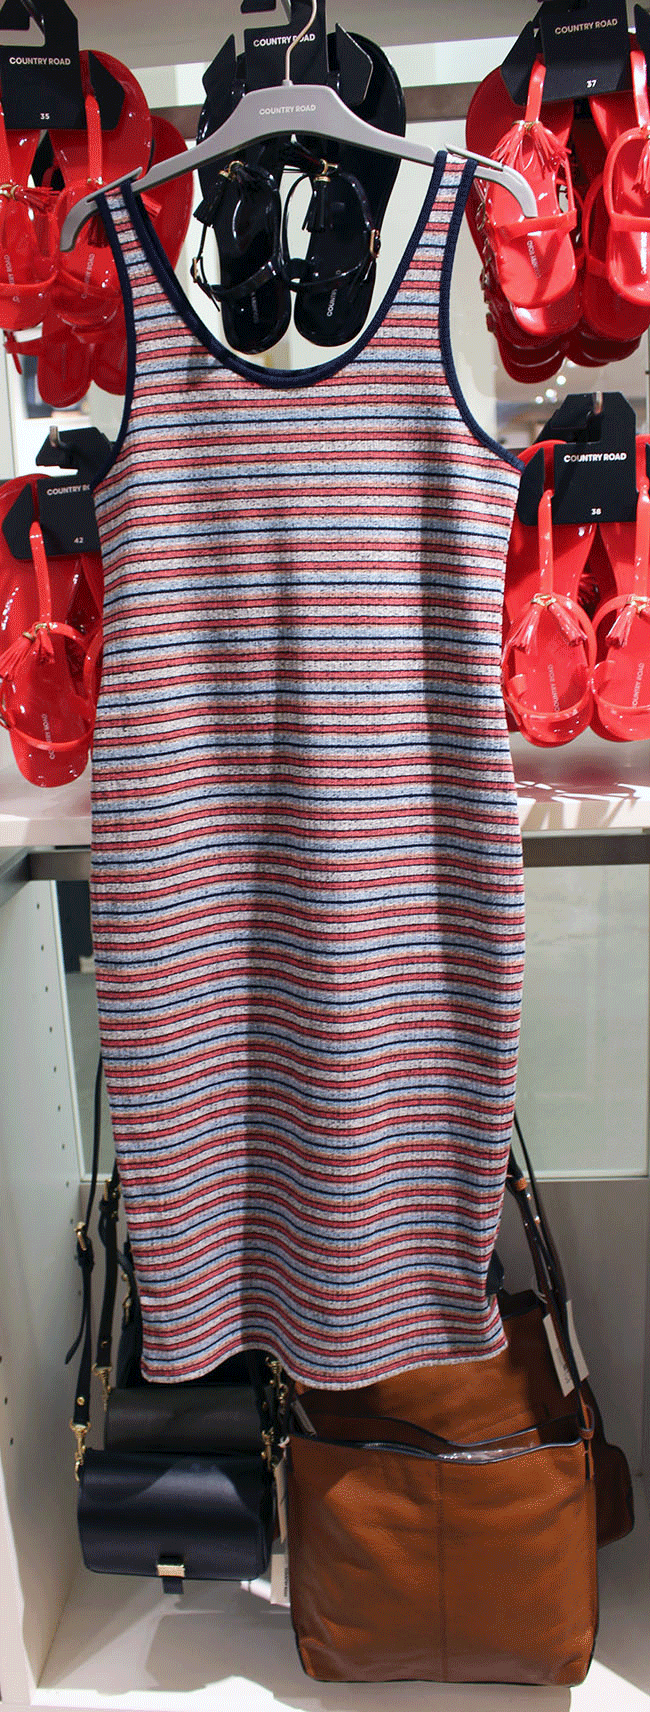 Or you may like to go the red and blue? Dress from Country Road $$99.95